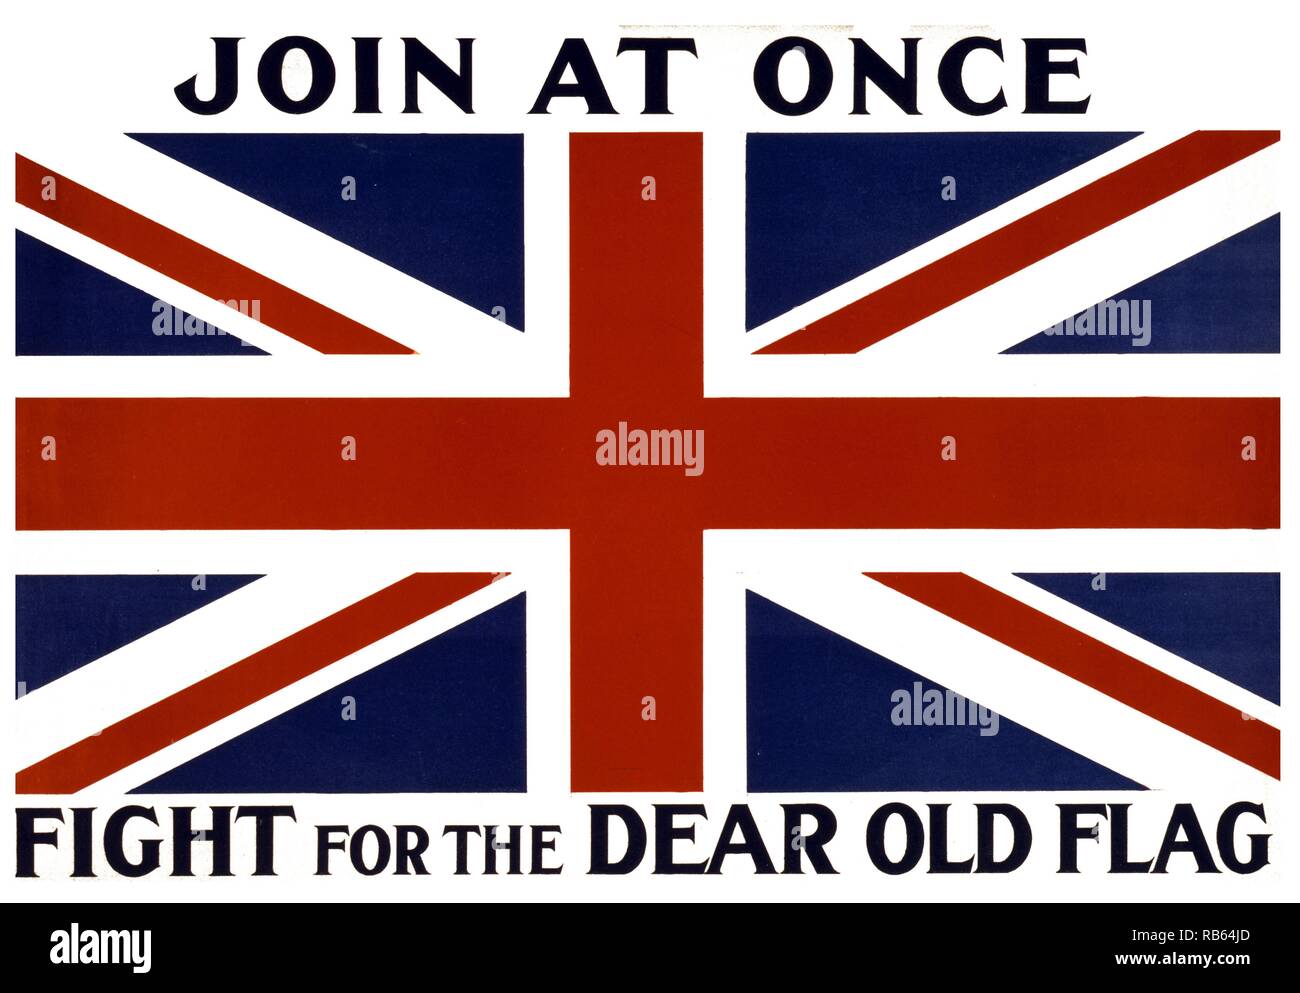 World War 1 Recruiting and enlistment poster, Great Britain 1914-1918. 'Join at once, fight for the dear old flag'. Stock Photo